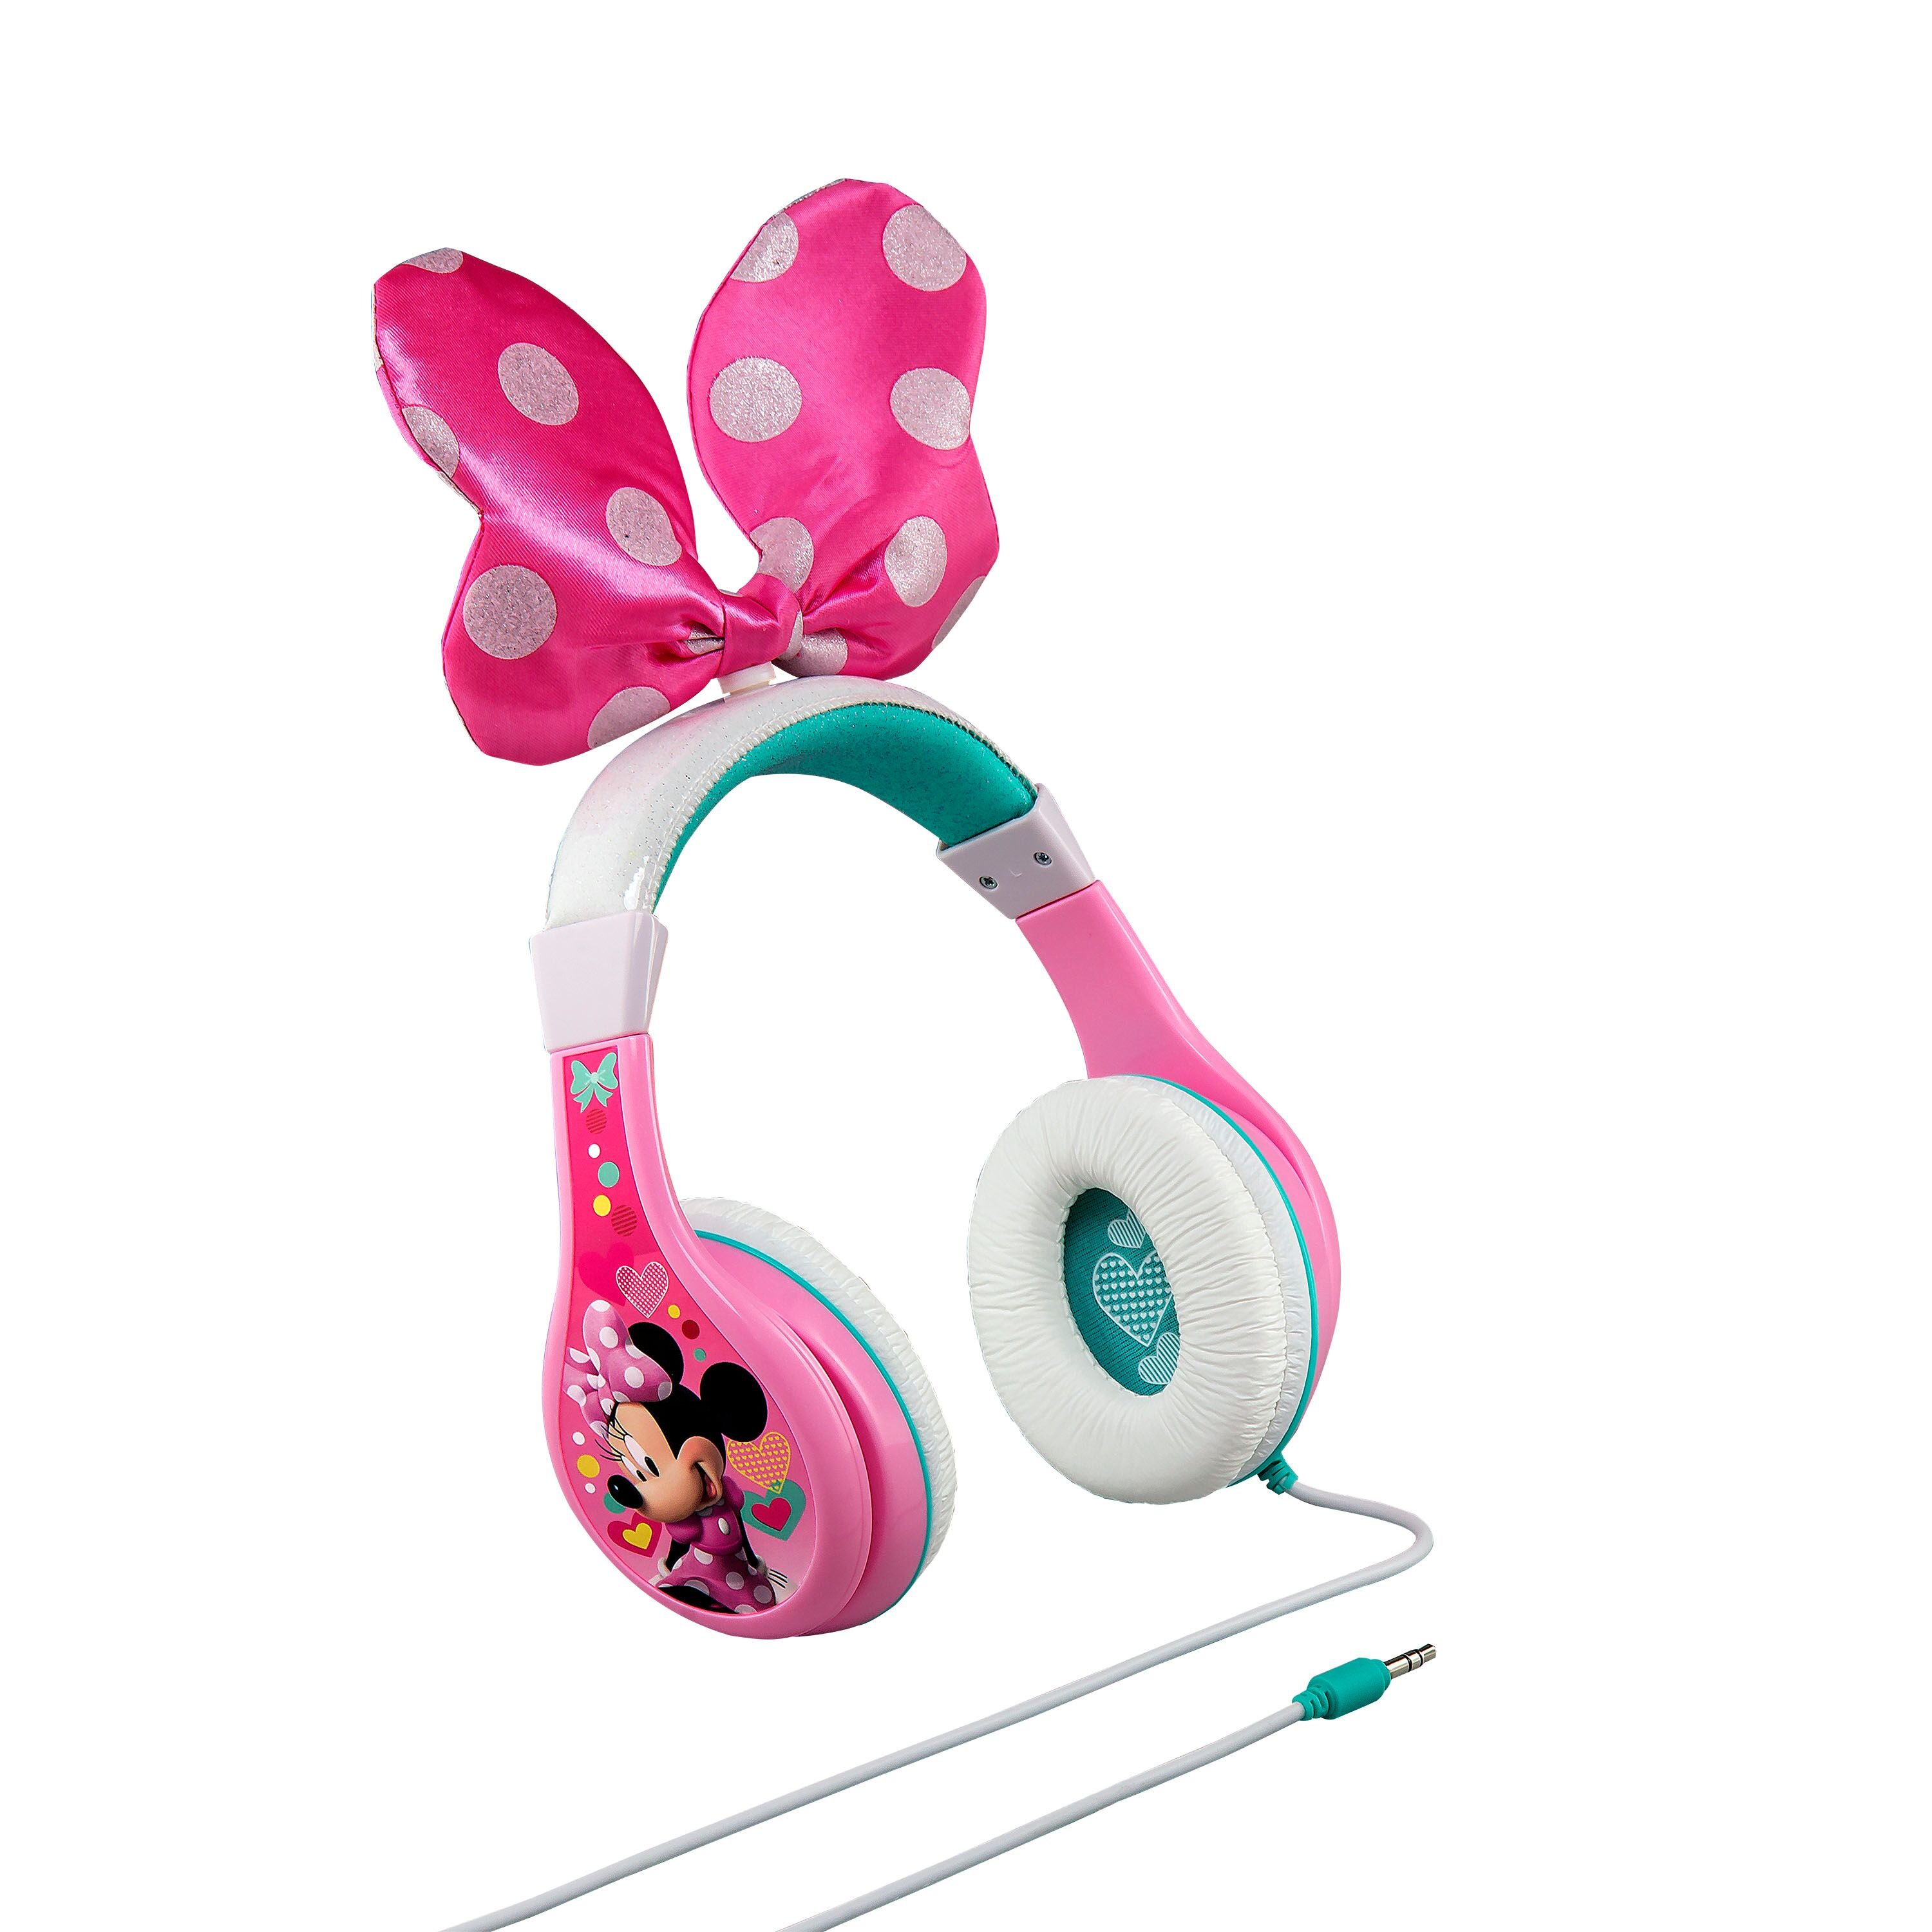 eKids - Minnie Bow-tique - Over-ear headphone with volume limiter